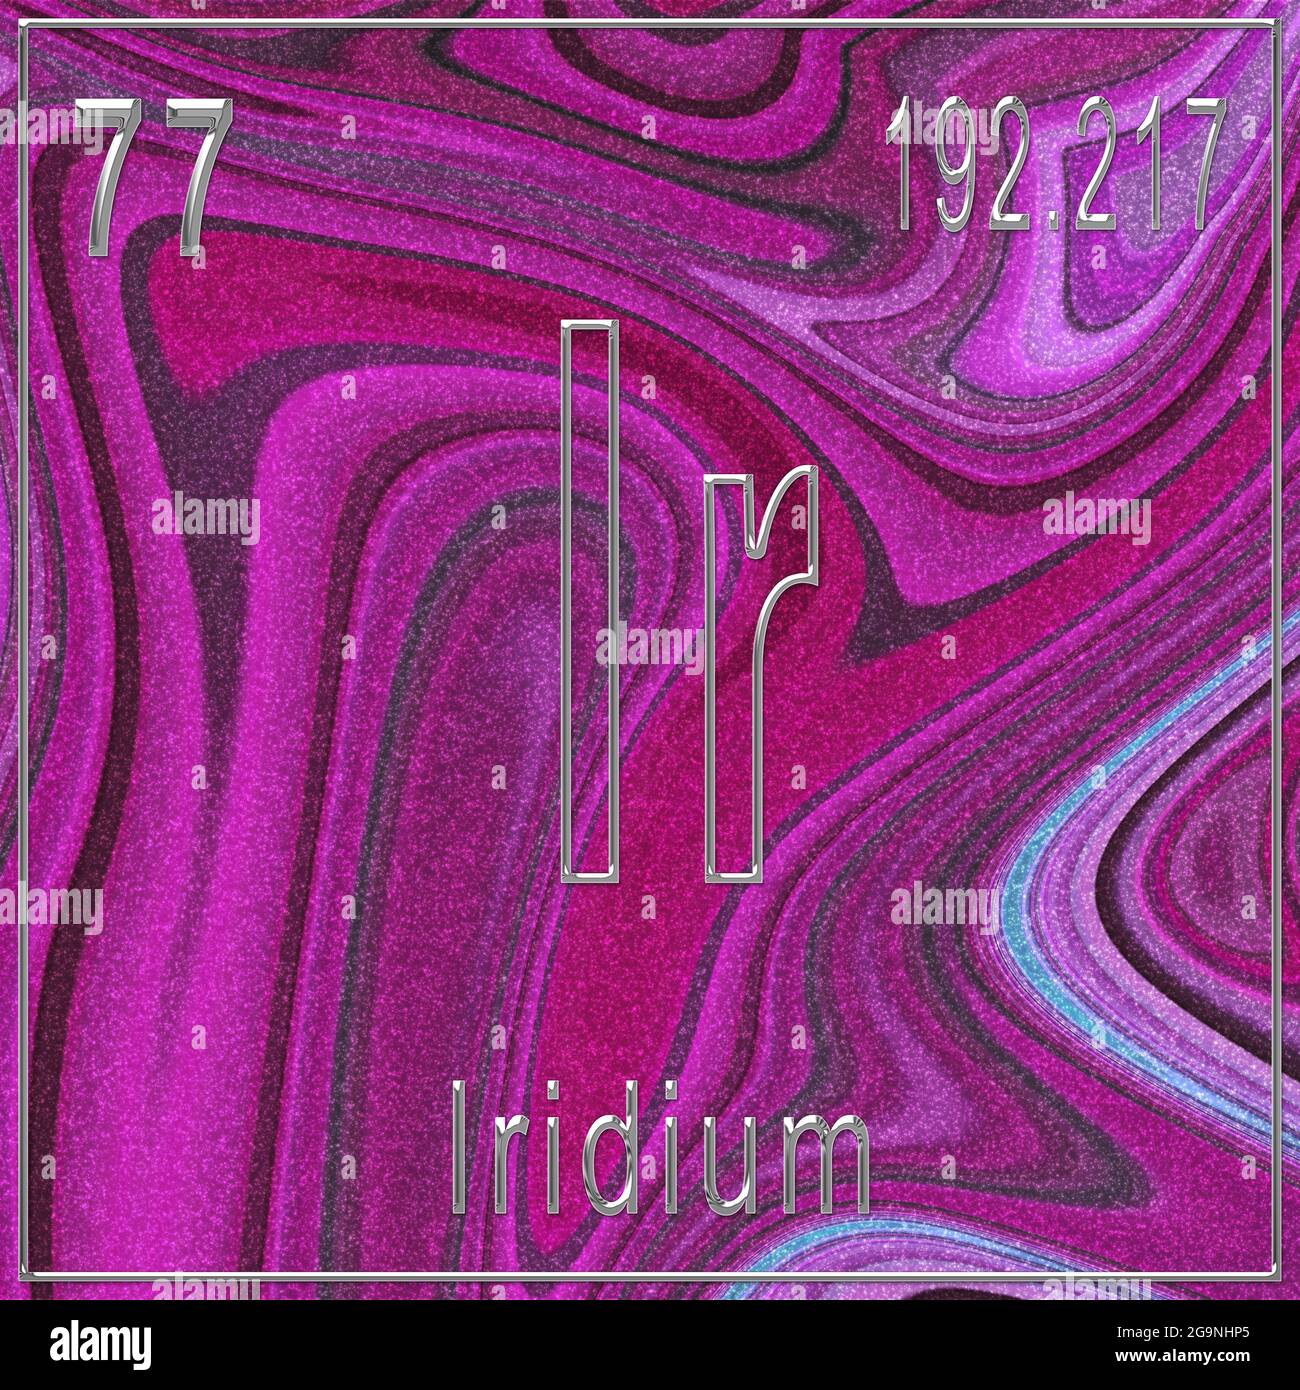 Iridium chemical element, Sign with atomic number and atomic weight, Periodic Table Element, Pink background Stock Photo